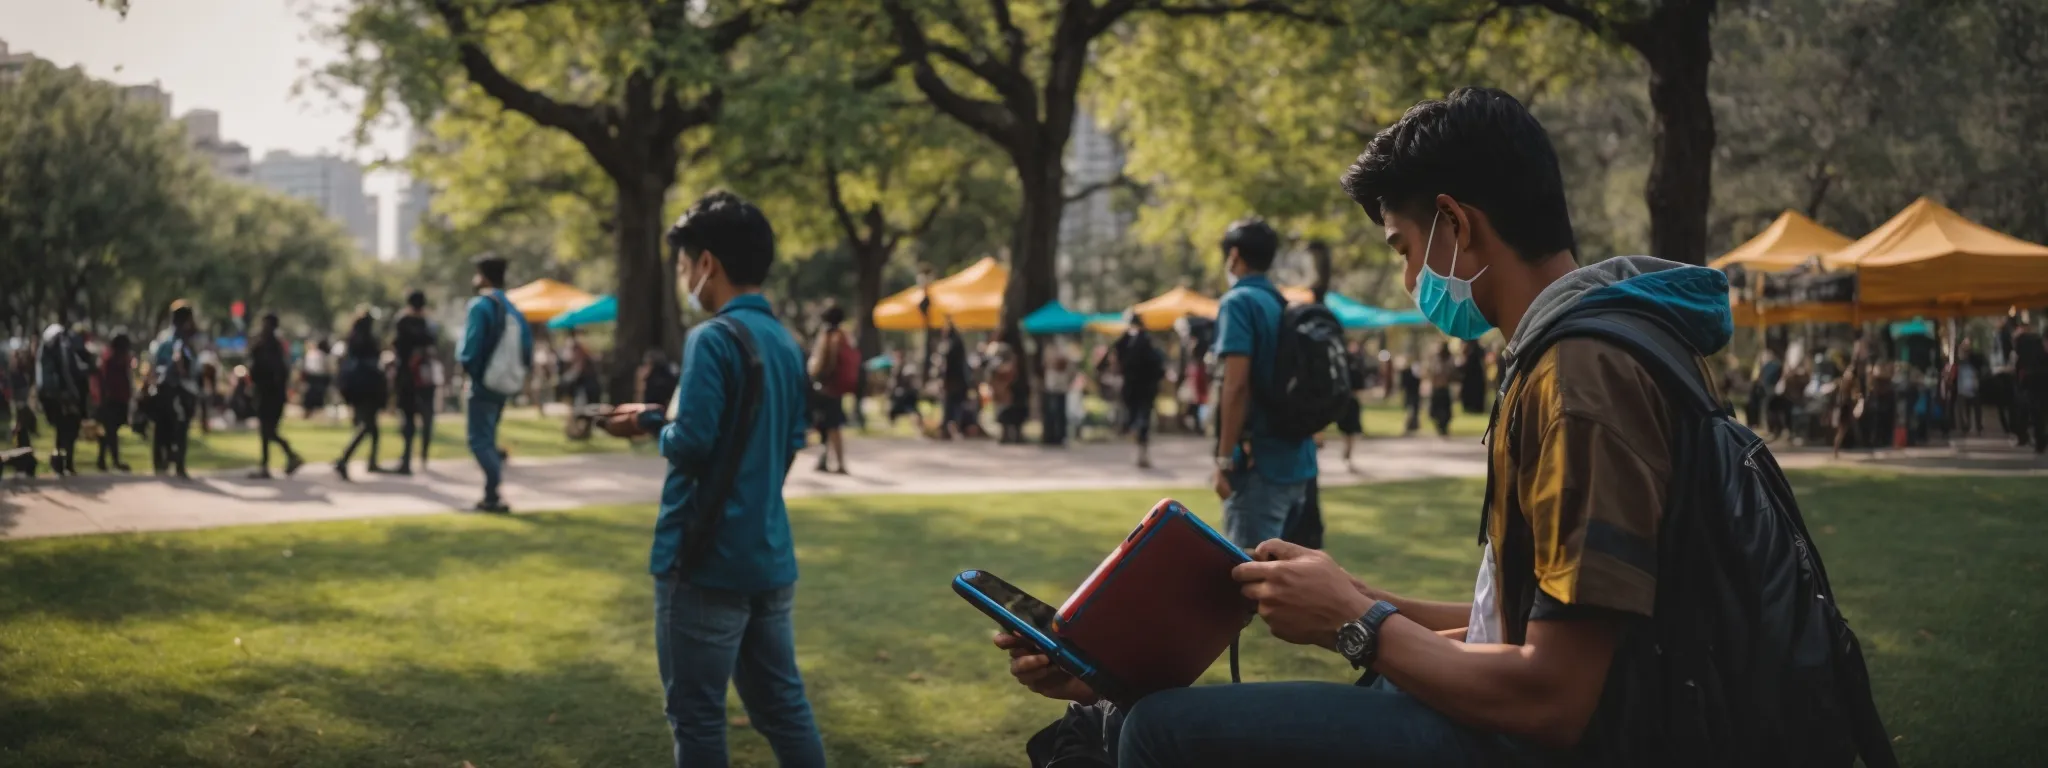 a person engrossed in playing a vibrant and captivating game on a smartphone amidst a bustling city park.